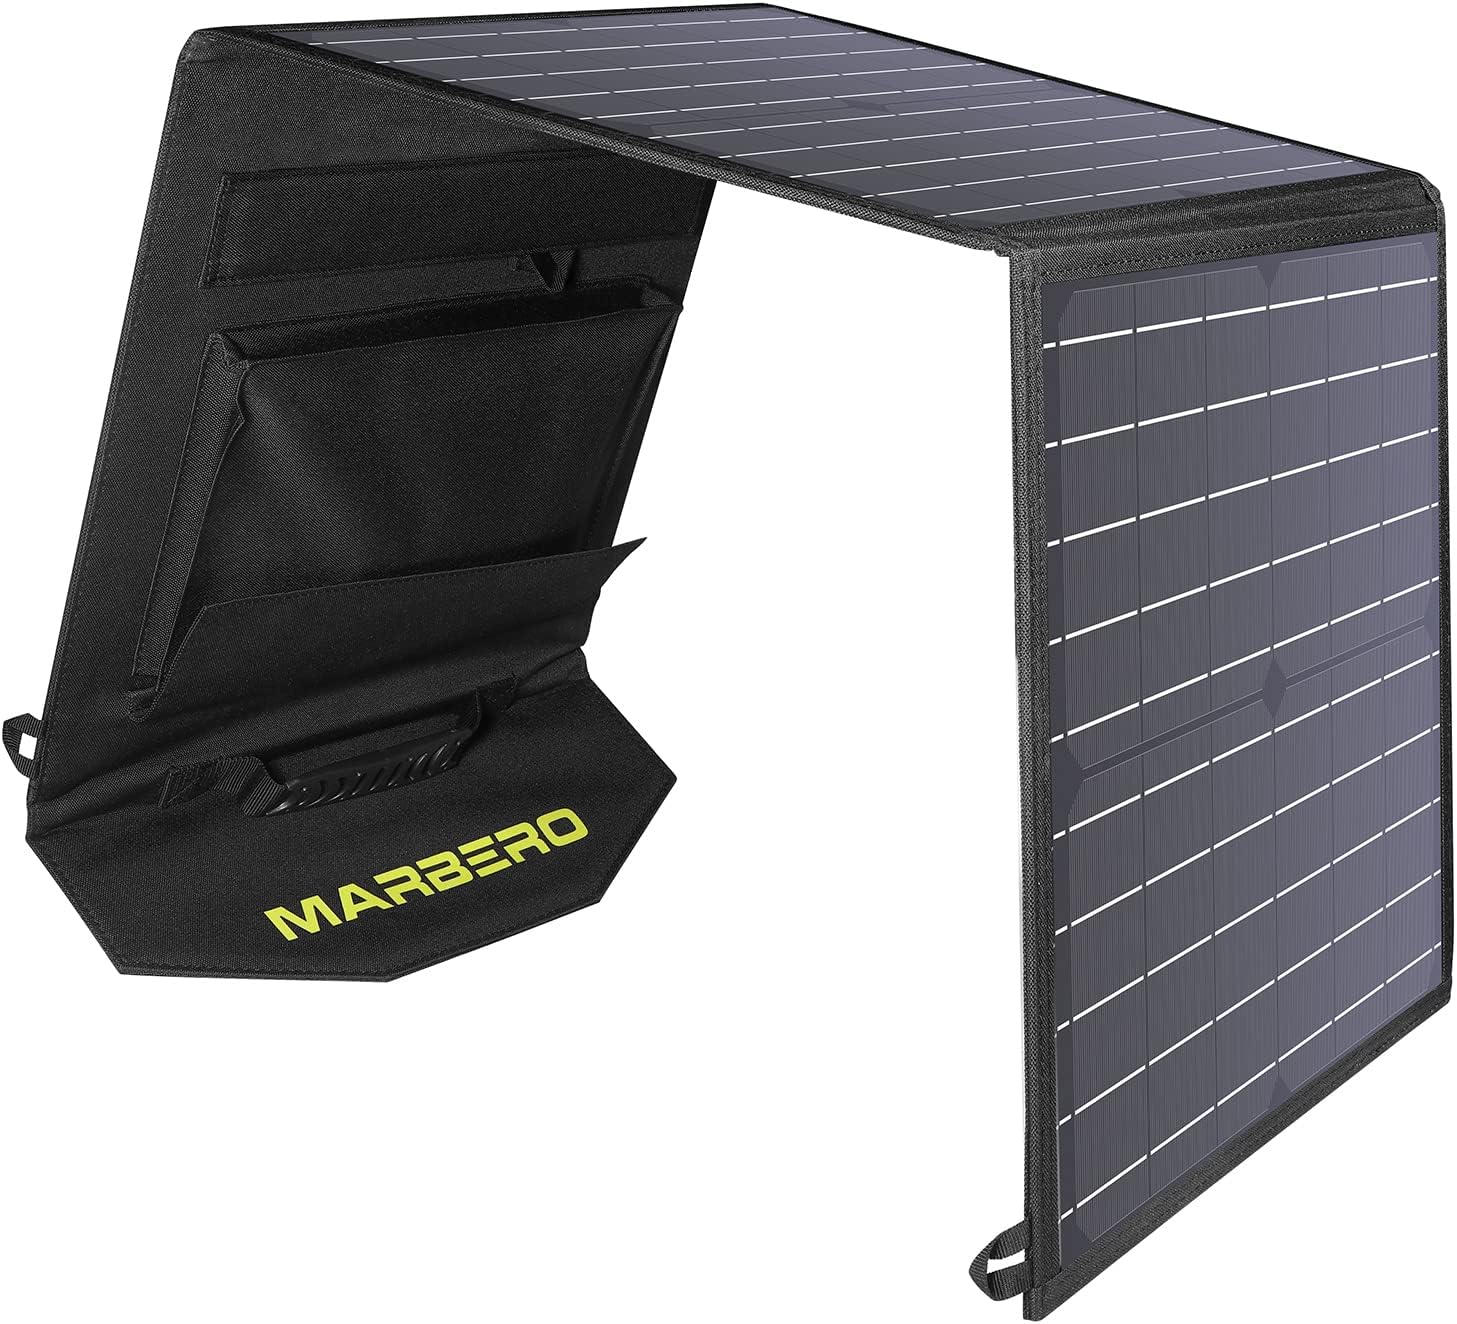 MARBERO 60W Foldable Solar Panel for Portable Power Station Solar Generator Portable Solar Panel QC3.0/PD 60W USB Port DC Output(10 Changeable Adapters) for Home, Camping, Travel, RV Trip - MARBERO 60W Foldable Solar Panel Review